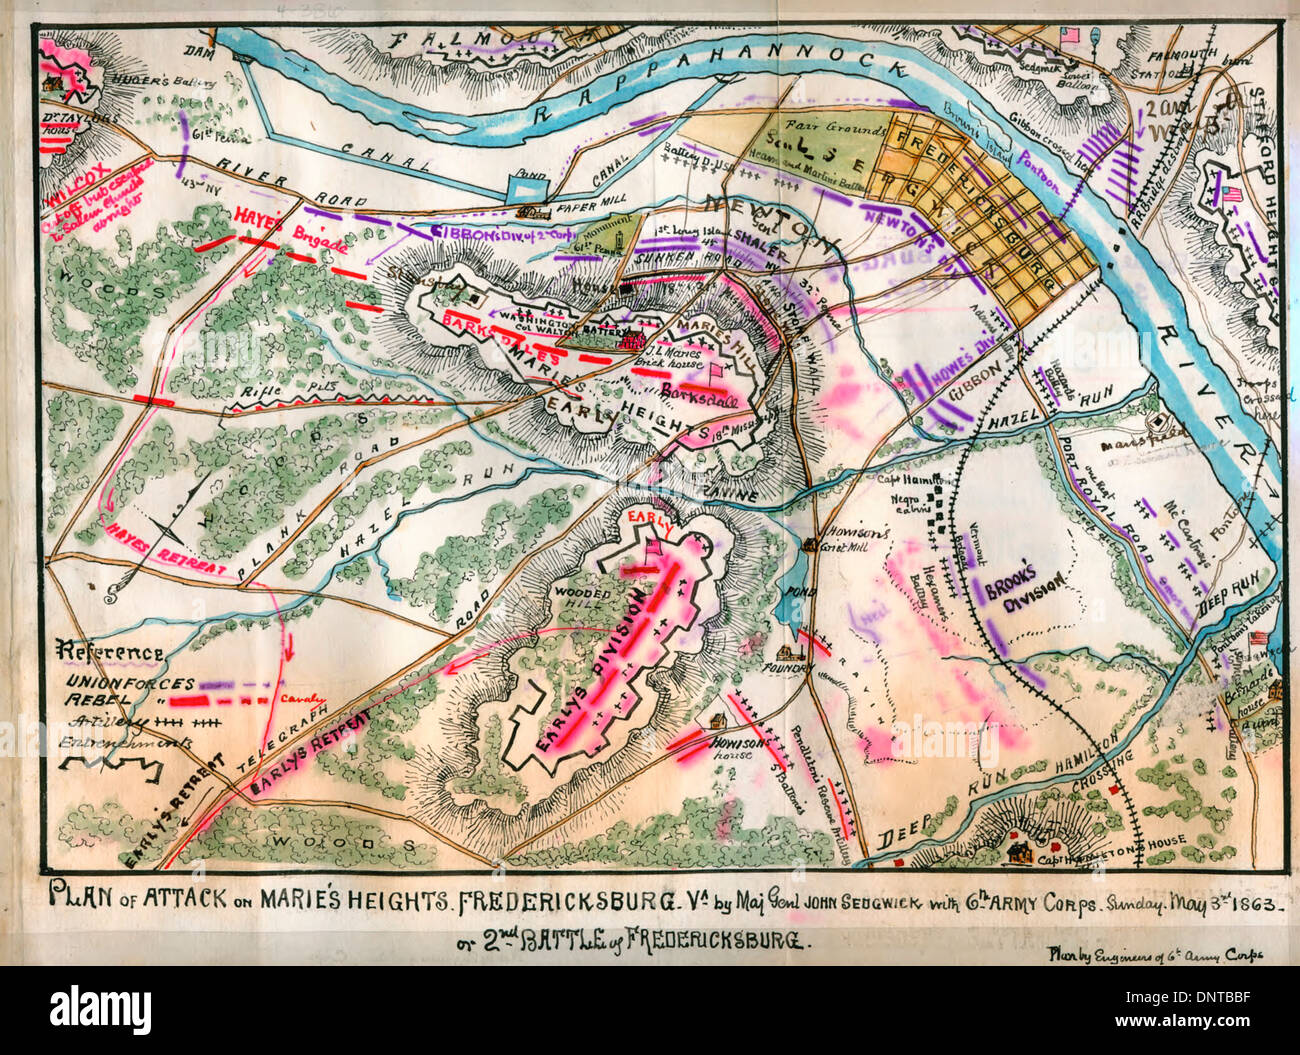 Plan of attack on Mayre's Heights, Fredericksburg, Virginia or Battle of Fredericksburg. By Major General John Sedgwick with 6th Army Corps, Sunday, May 3rd, 1863. Stock Photo